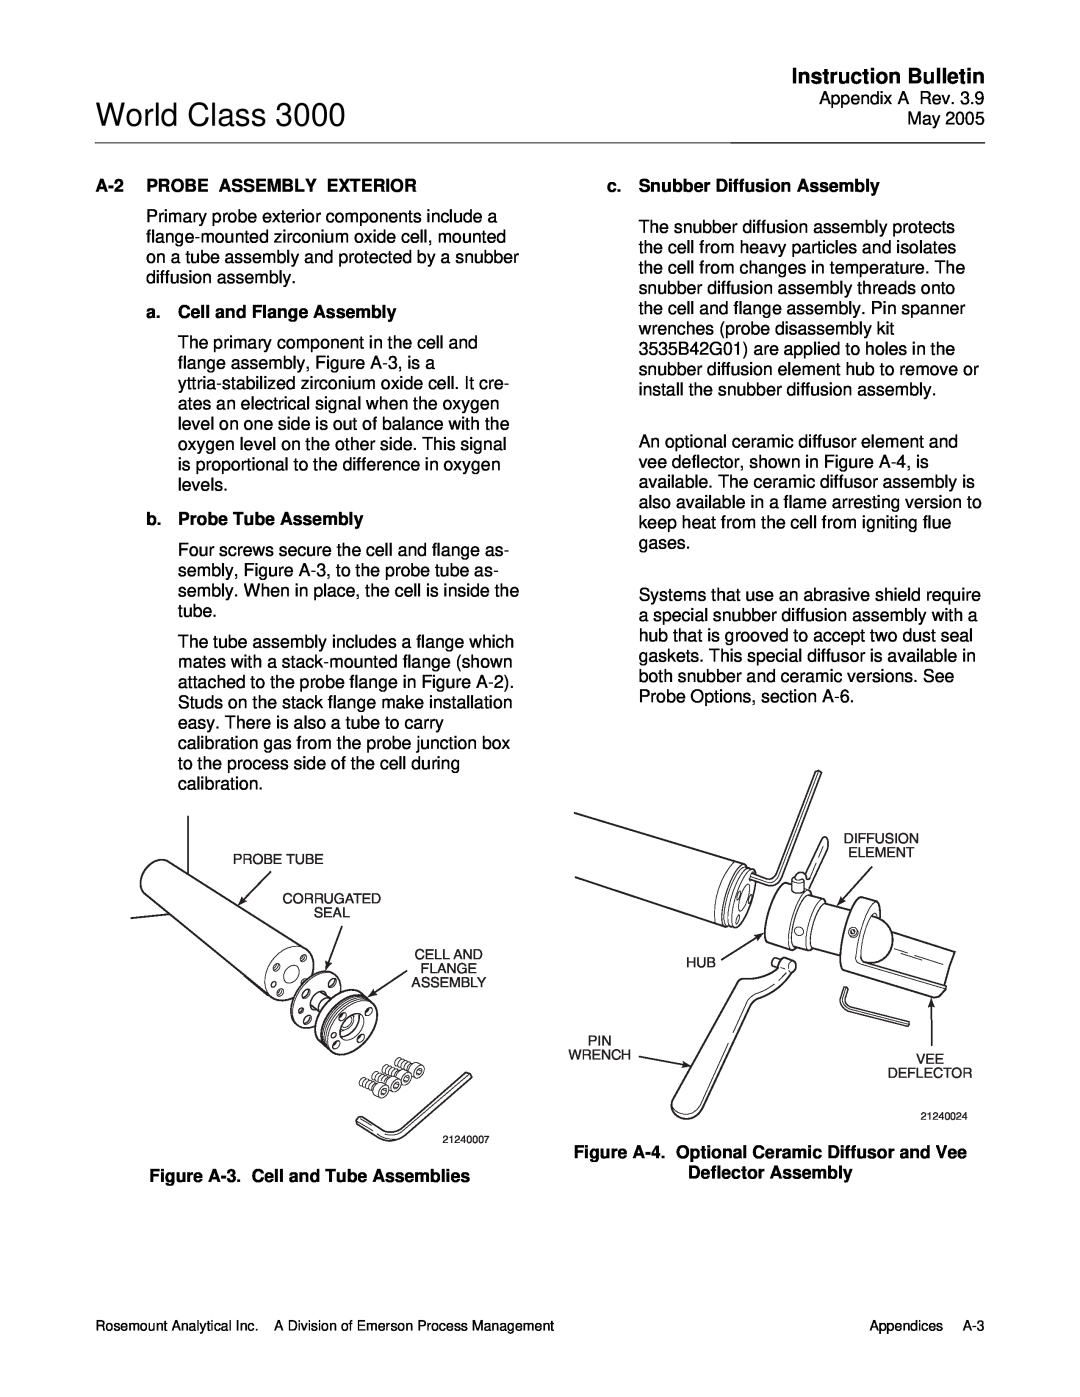 Emerson 3000 World Class, Instruction Bulletin, A-2PROBE ASSEMBLY EXTERIOR, a.Cell and Flange Assembly, Deflector Assembly 